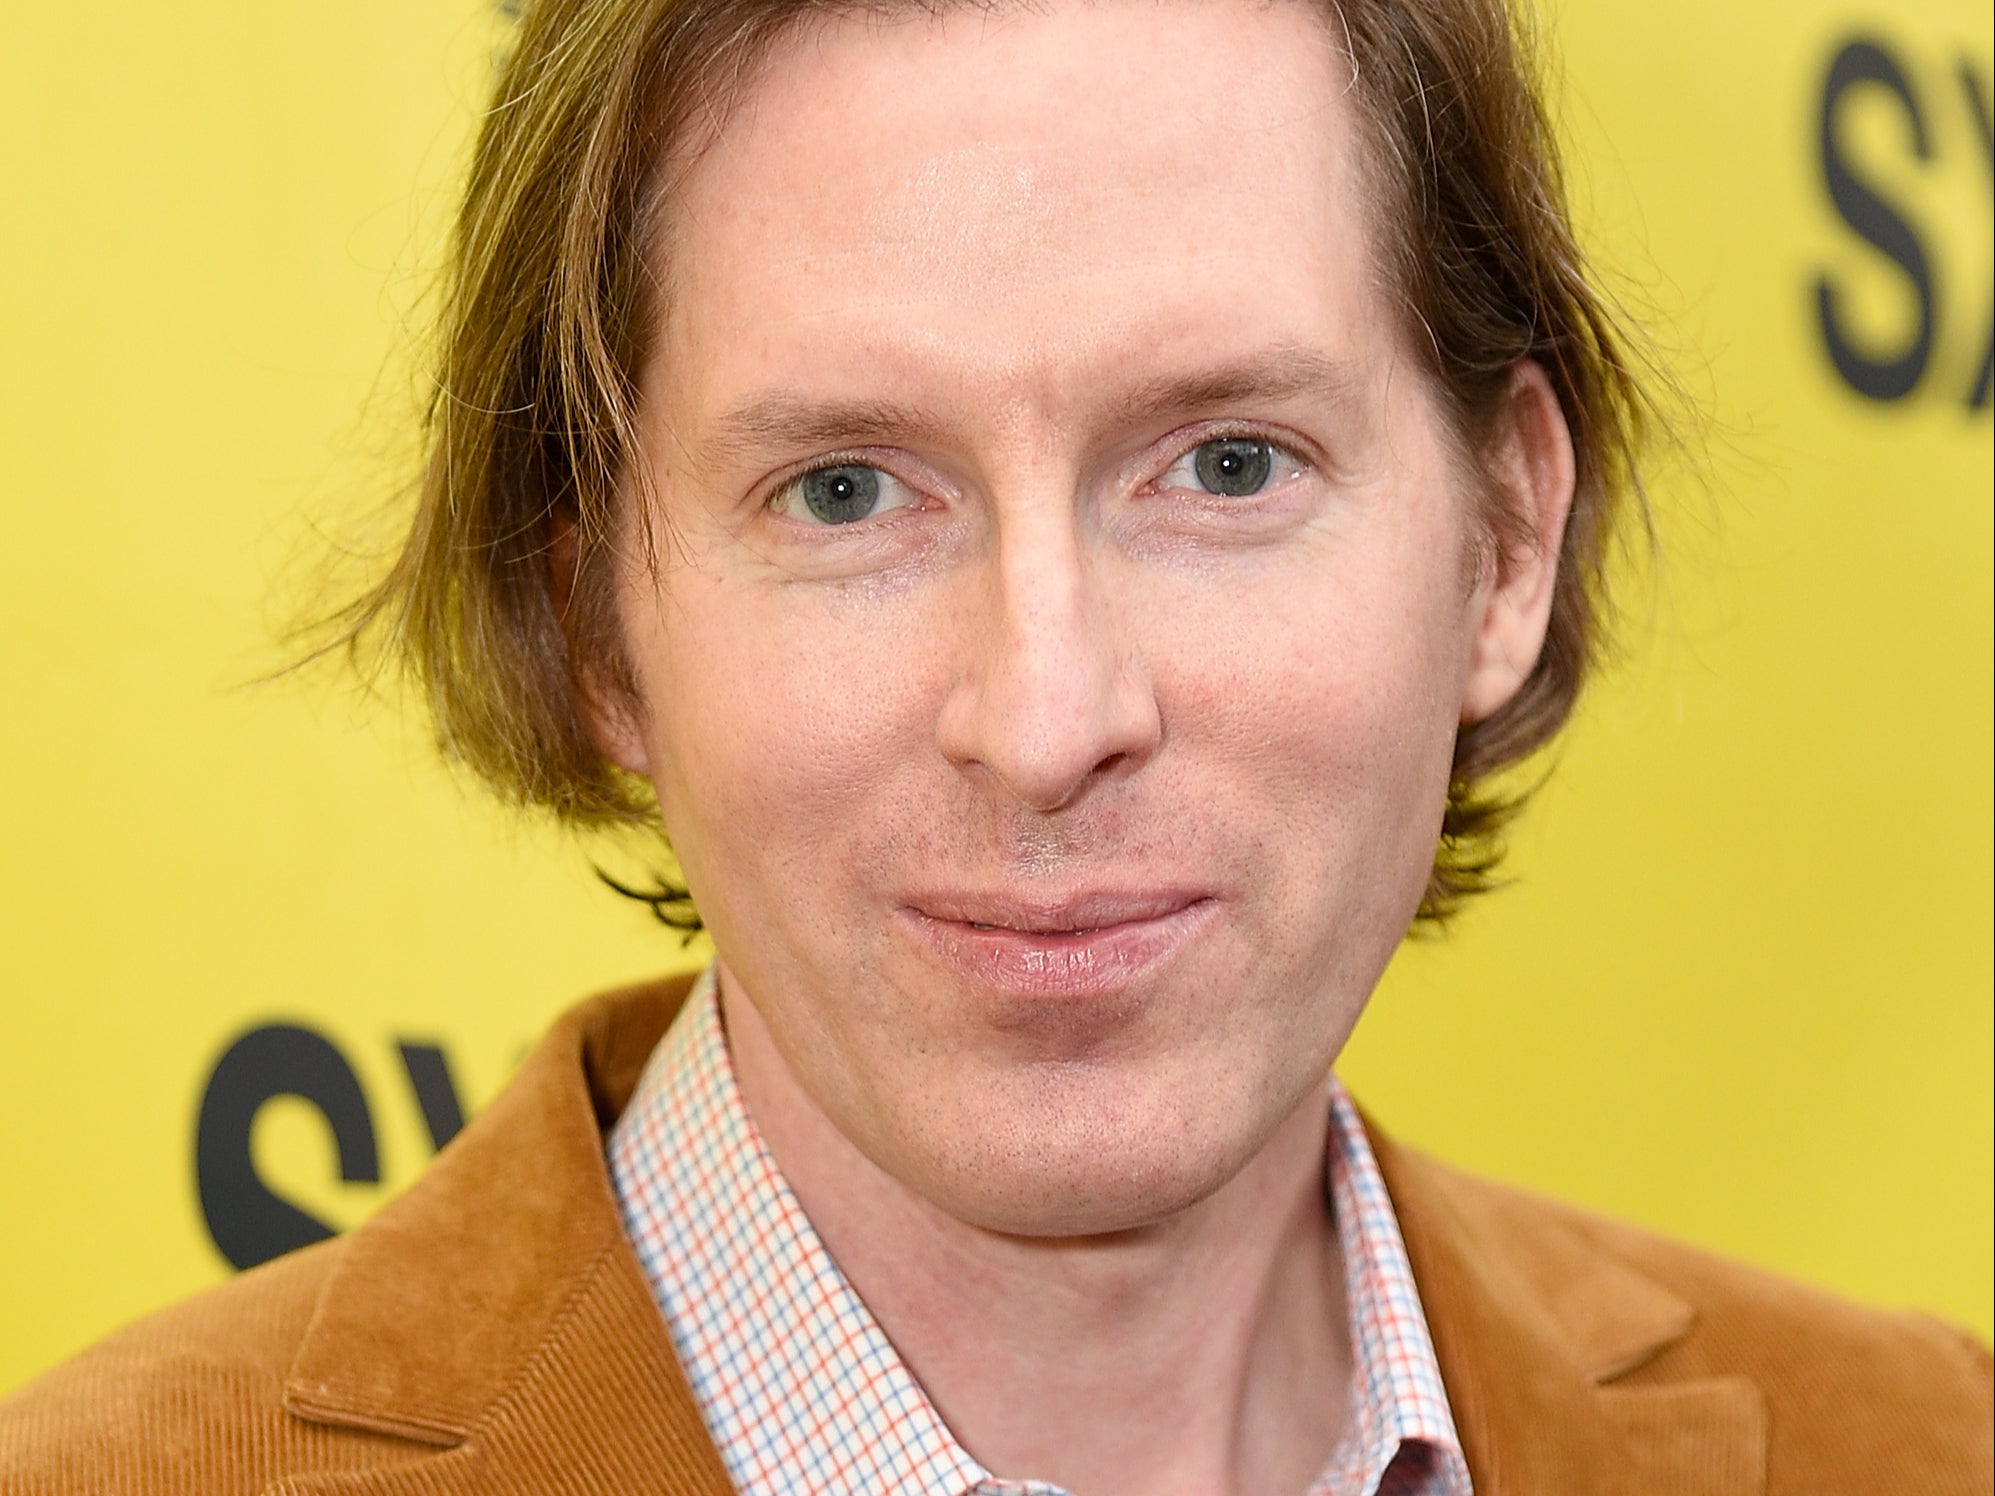 Wes Anderson’s adaptation of Roald Dahl’s ‘The Wonderful Story of Henry Sugar’ is coming to Netflix this month